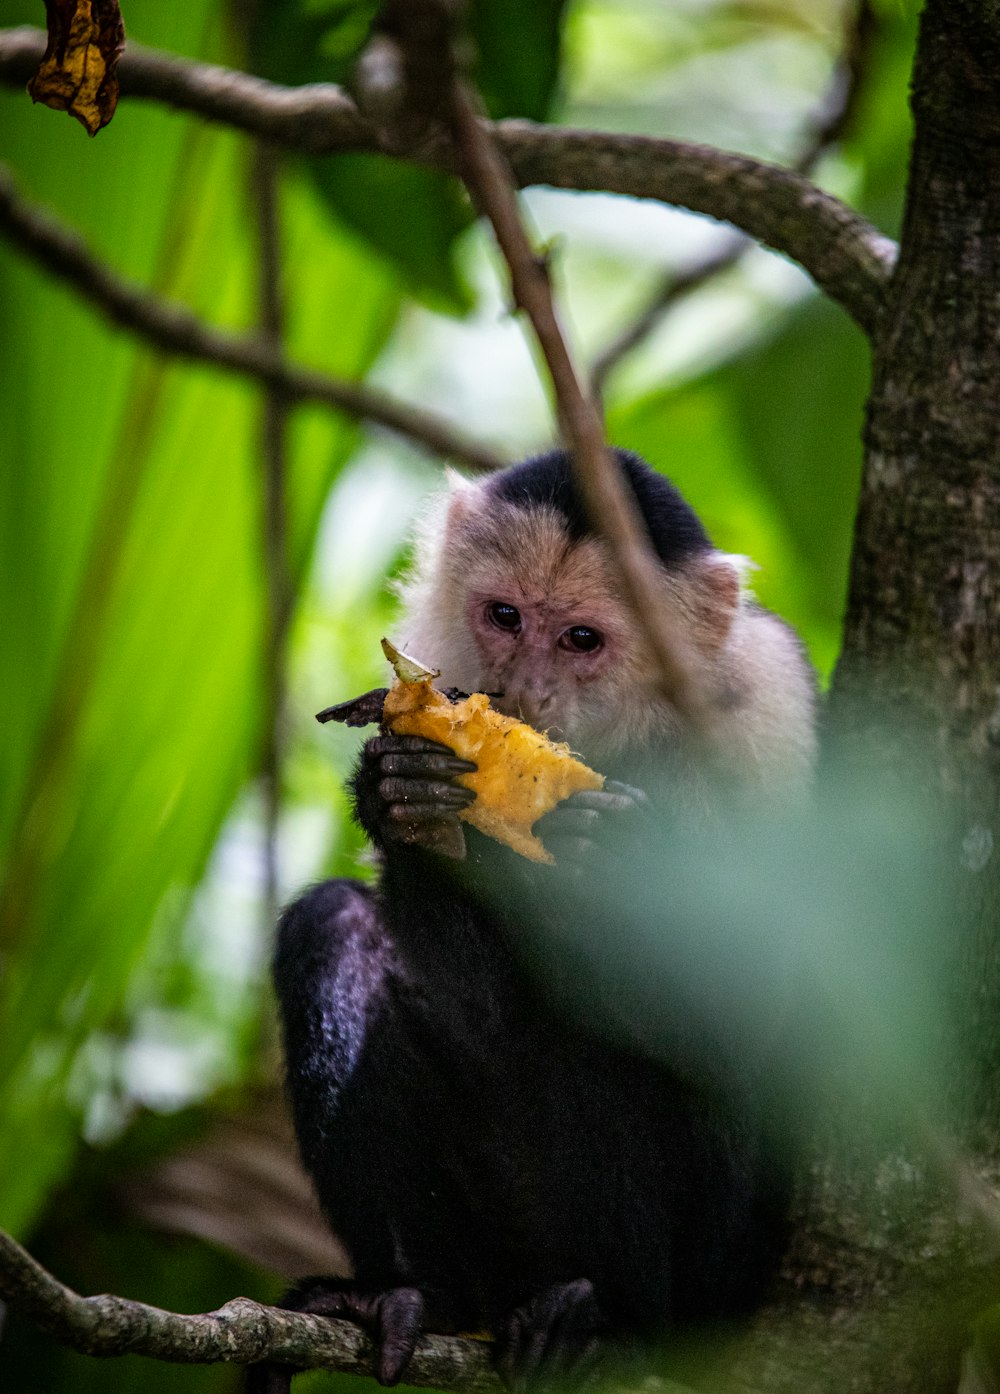 a monkey eating a banana in a tree